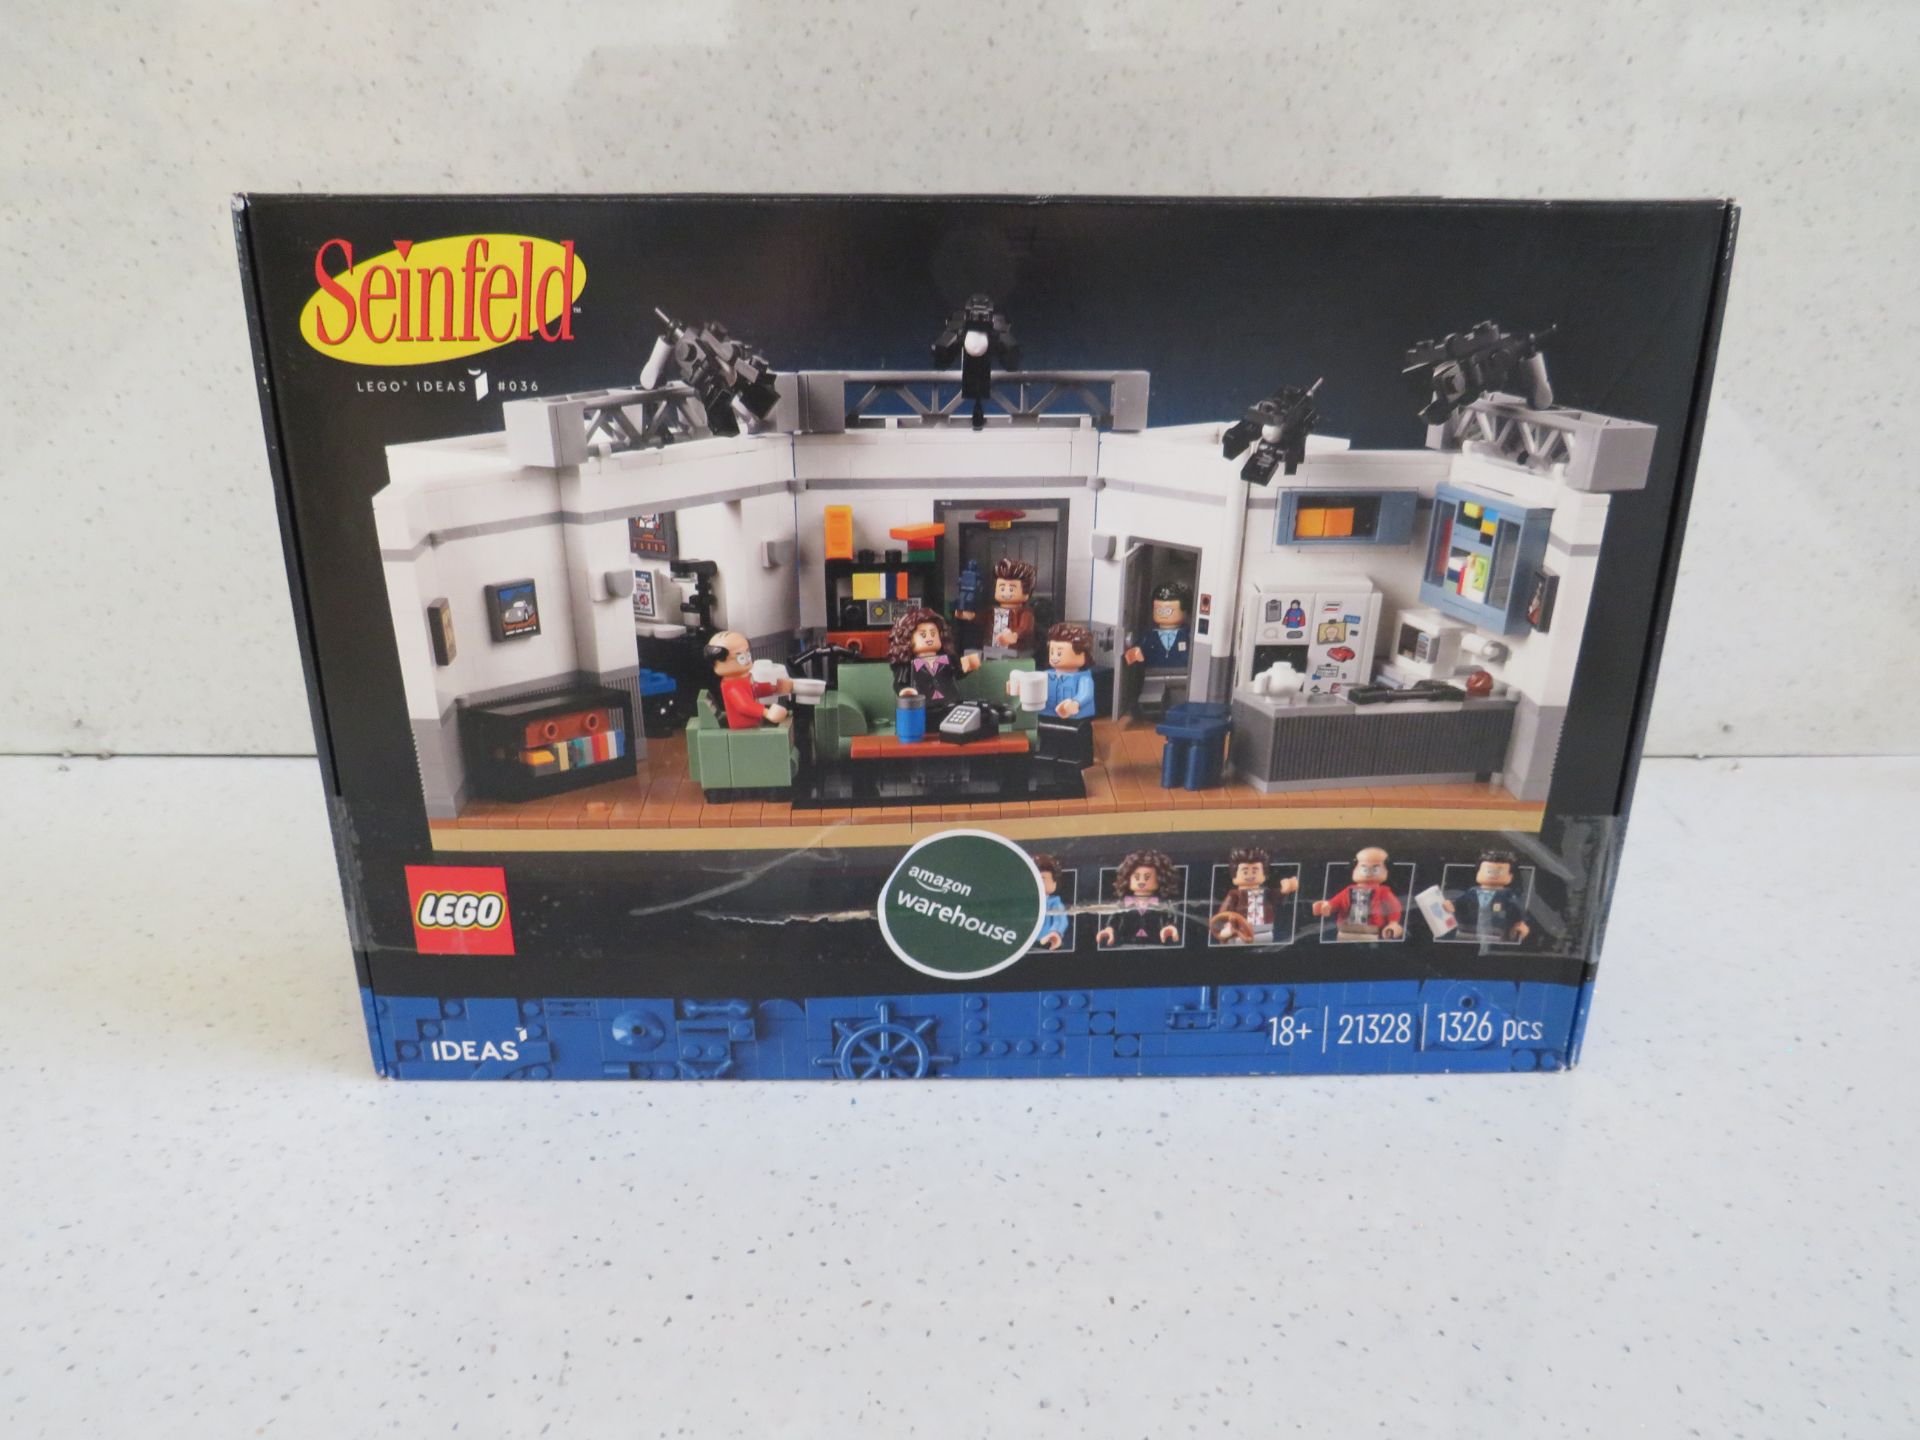 Lego - 21328 Seinfeld Buildset - Unchecked & Boxed.